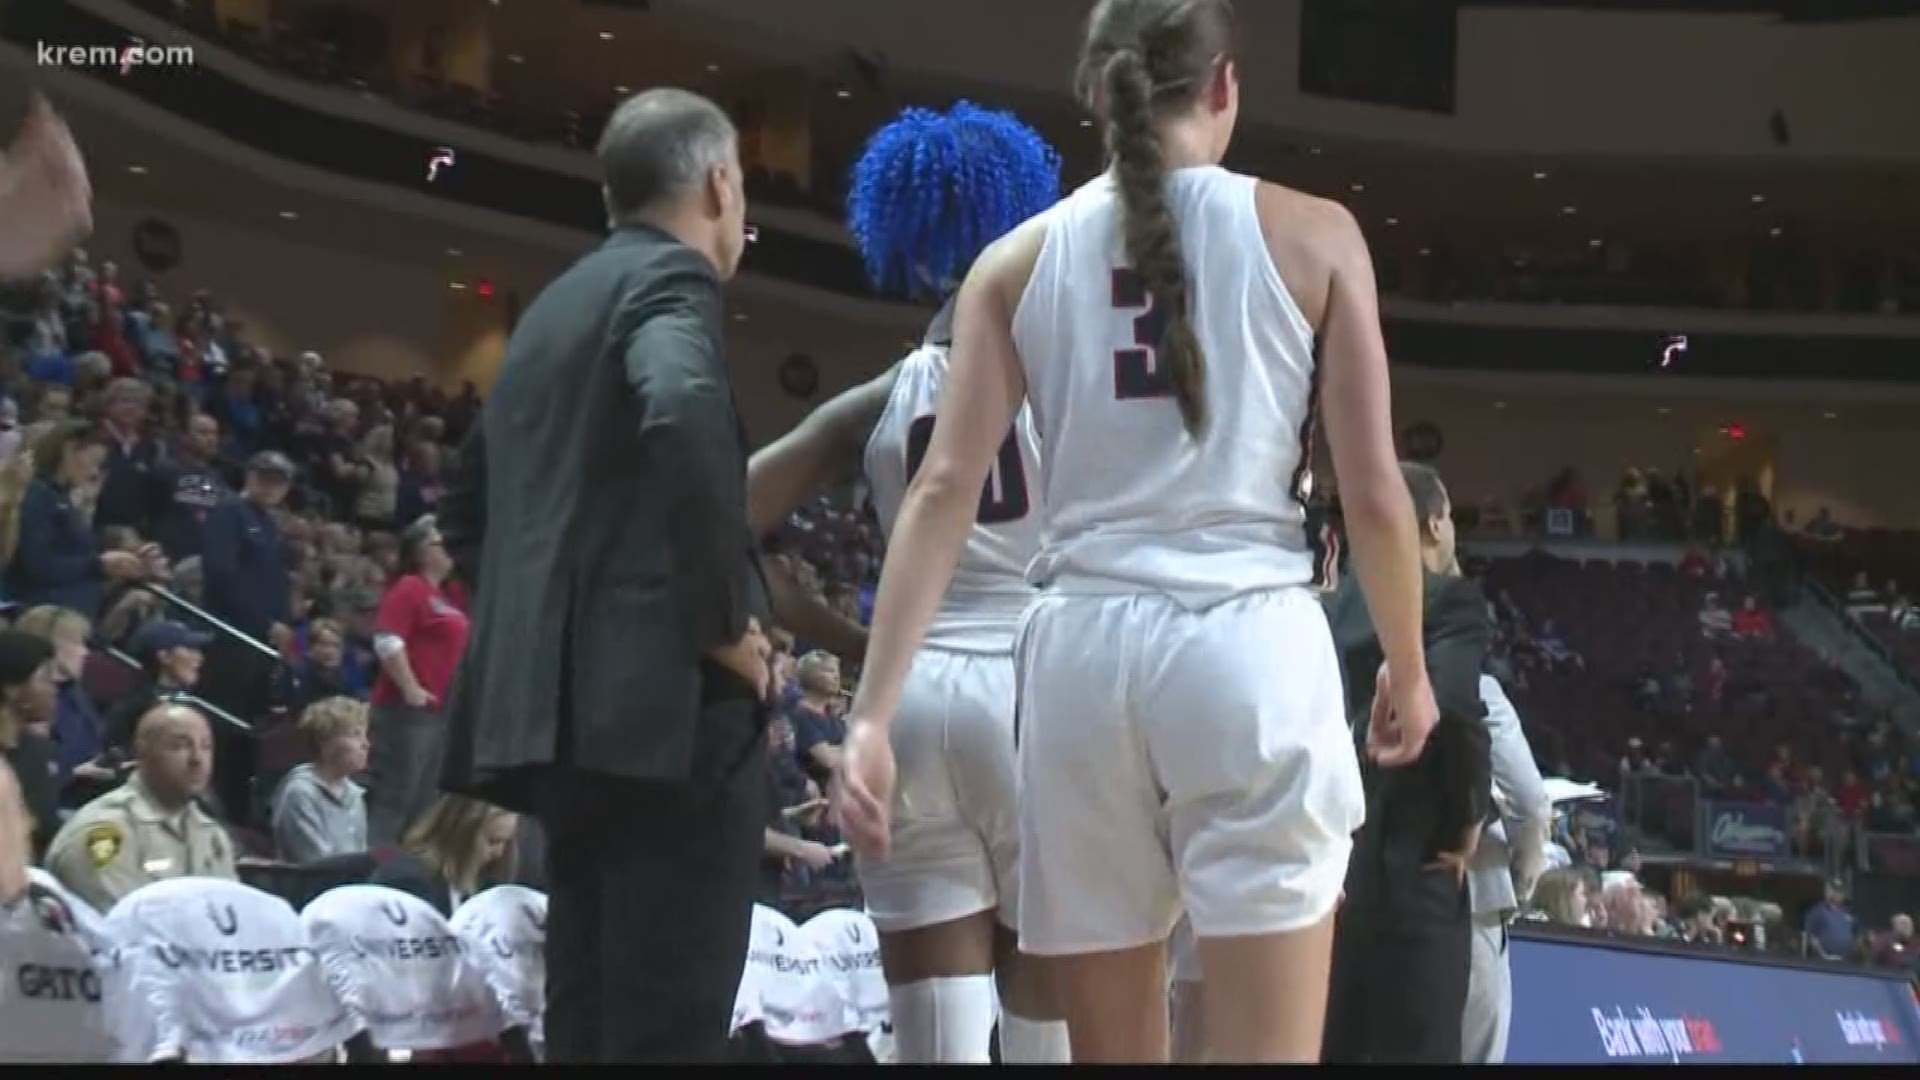 KREM Sports Director Brenna Greene provides an update from Las Vegas as the Gonzaga women's basketball team lost the WCC title to BYU, and head coach Lisa Fortier had to leave the game early for a family emergency.